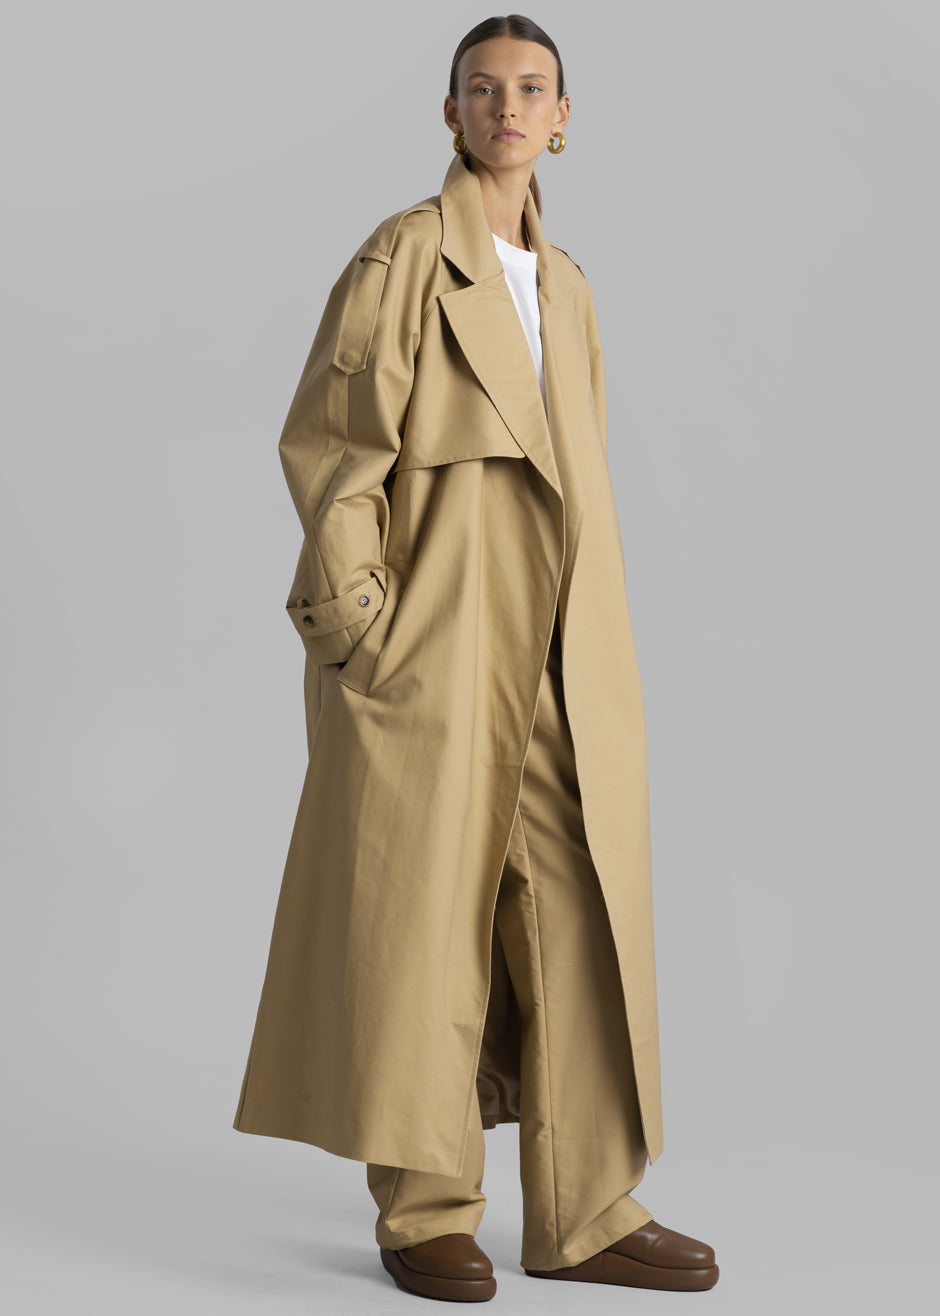 Suzanne Trench Coat - Beige - 3